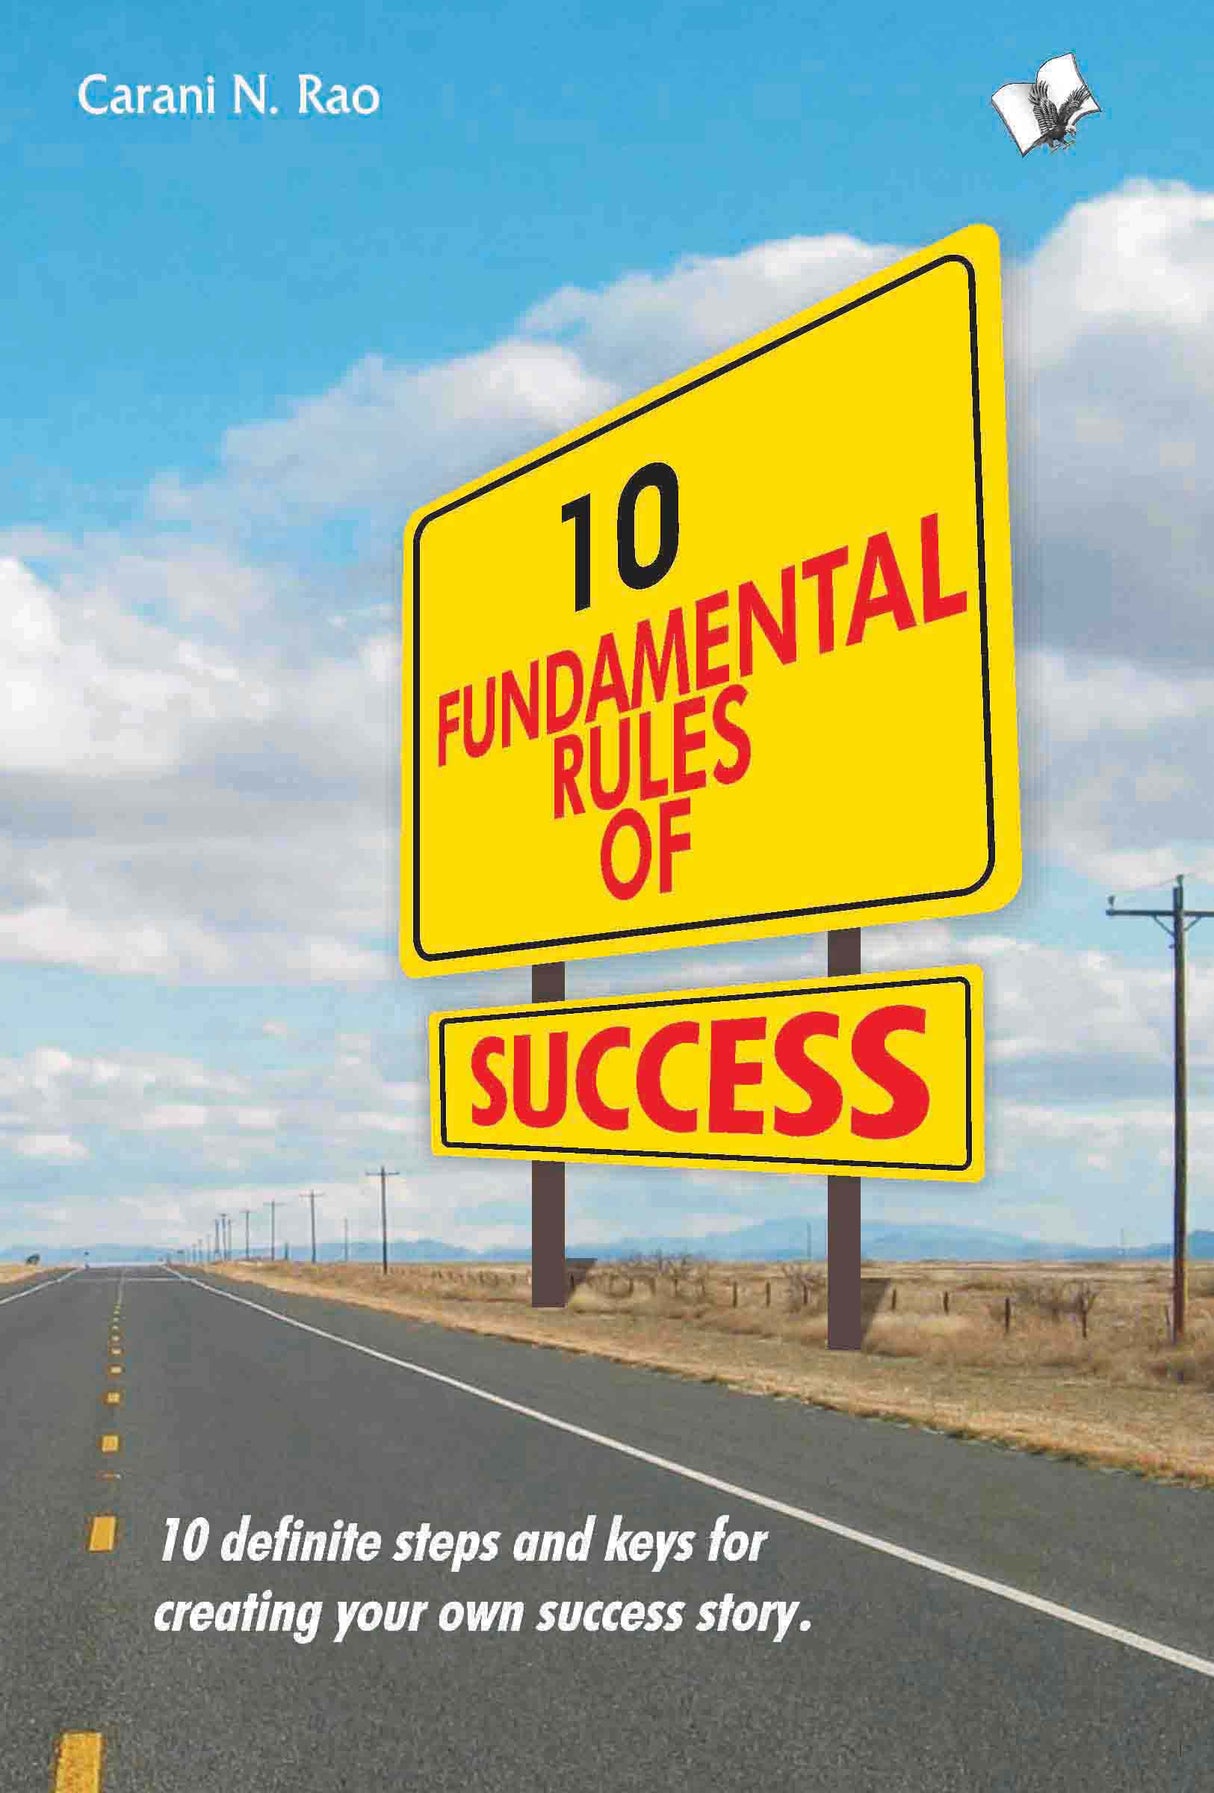 10 Fundamental Rules Of Success: 10 definite keys for creating your own success story